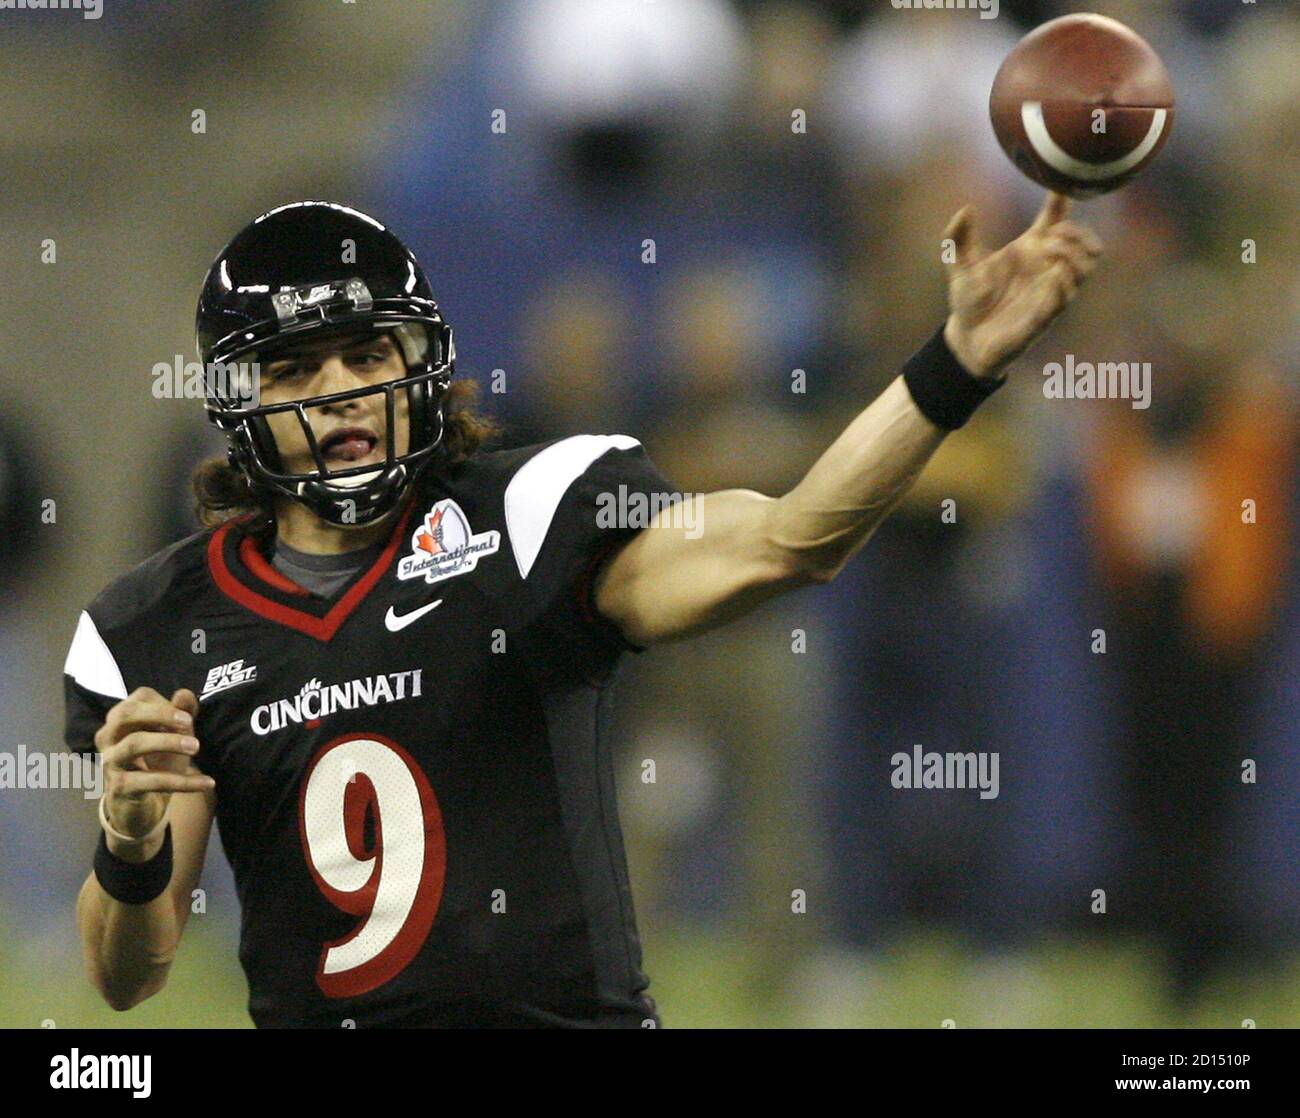 University of Cincinnati Bearcats quarterback Nick Davila throws a pass against the Western Michigan University Broncos during the first half of their inaugural NCAA International Bowl football game in Toronto January 6, 2007.    REUTERS/Mike Cassese   (CANADA) Stock Photo